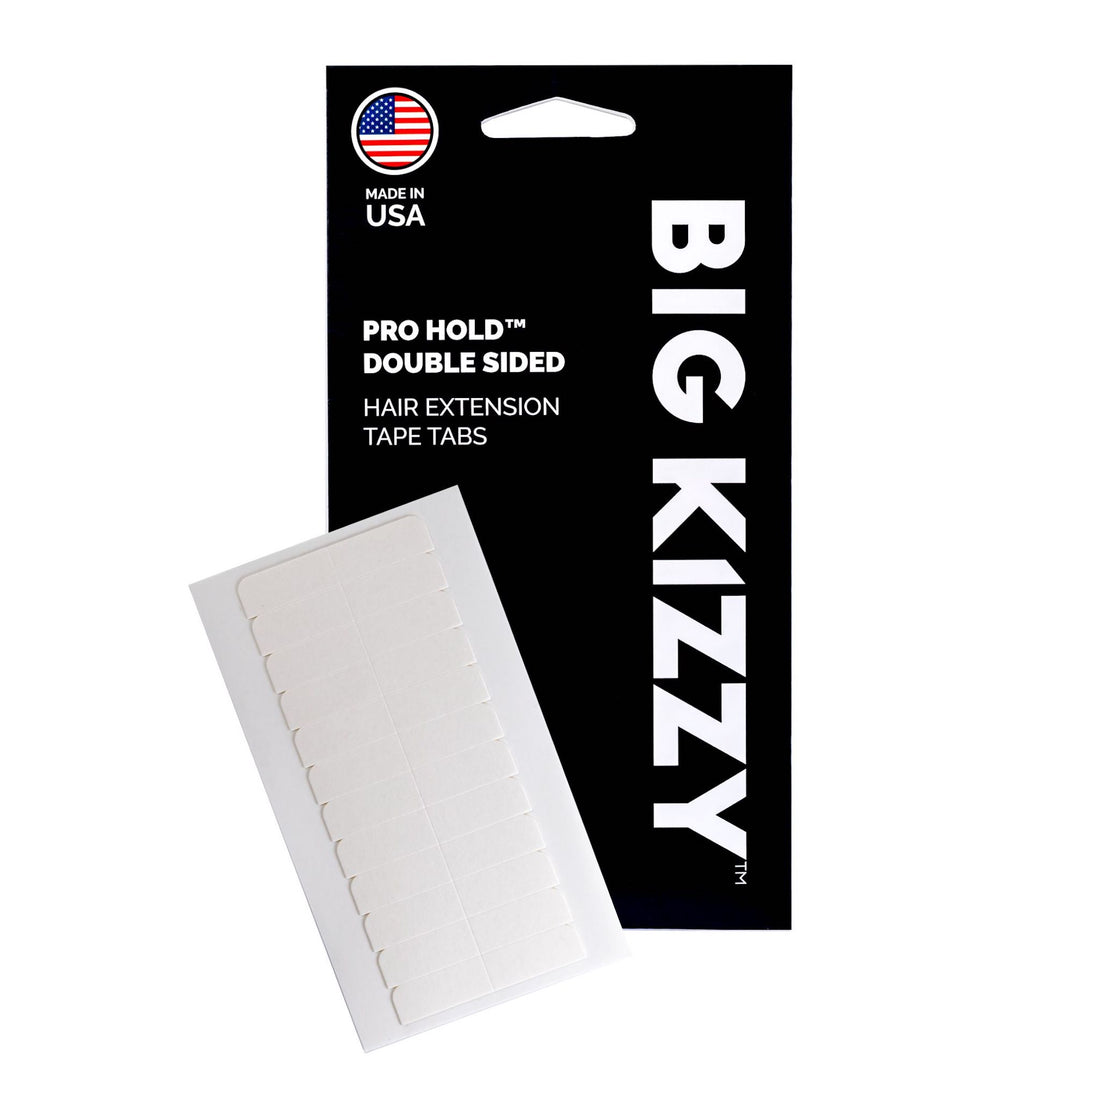 Big Kizzy® Pro Hold Double Sided Hair Extension Replacement Tape Tabs Packaging with a white sheet of tape tabs overlayed on top of it